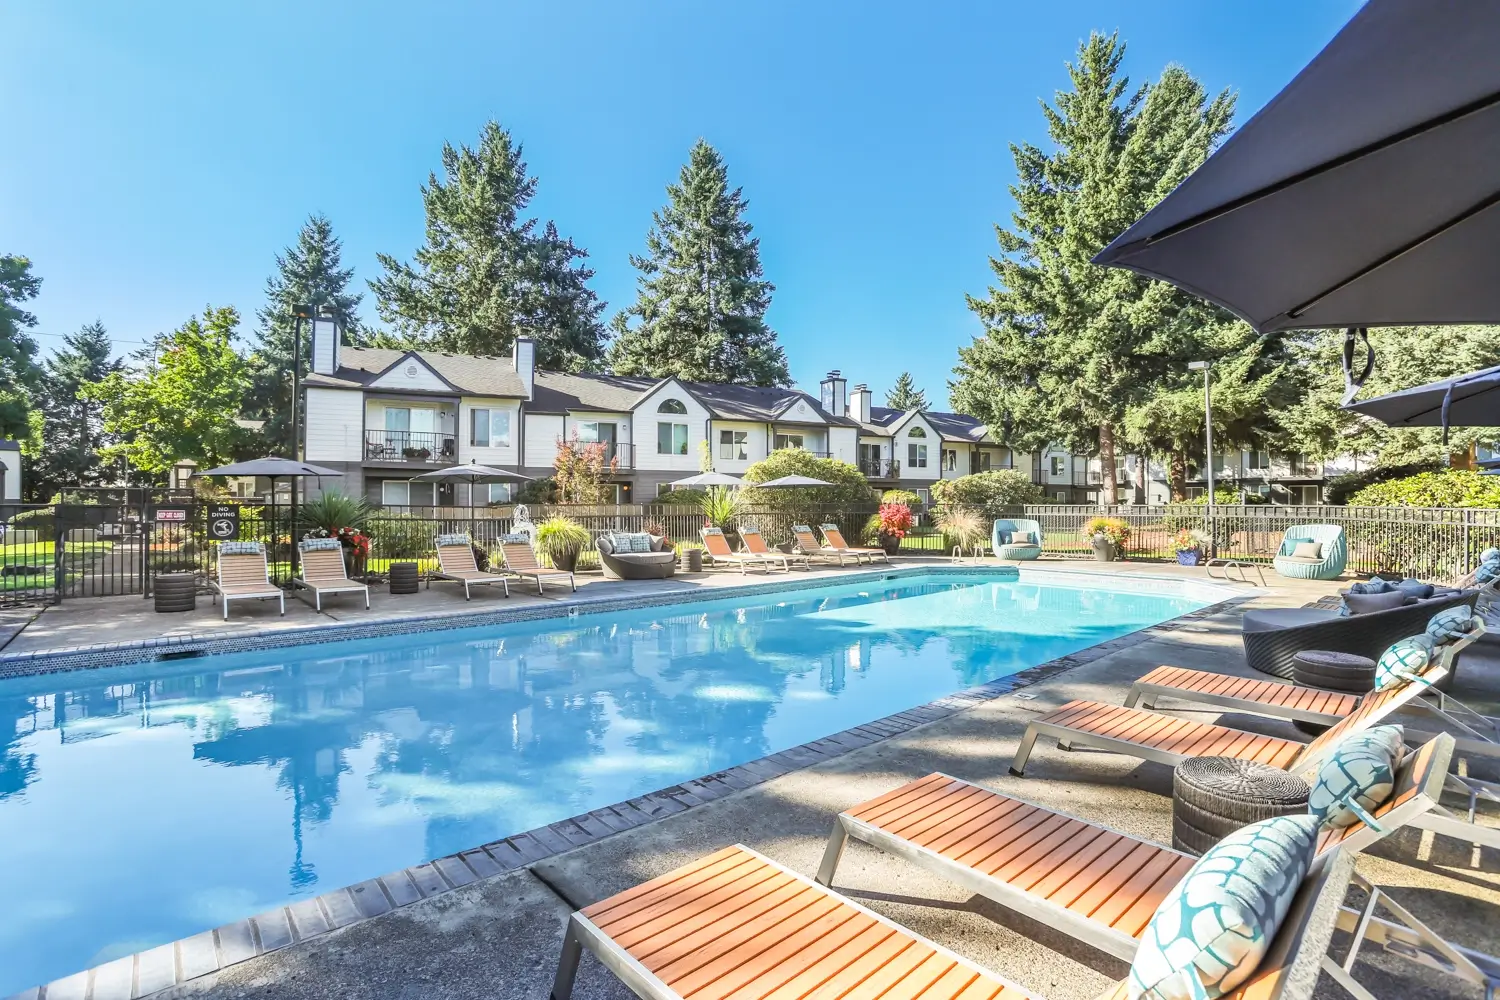 Outdoor pool area with comfortable seating, umbrellas for shade, and poolside lounge chairs.